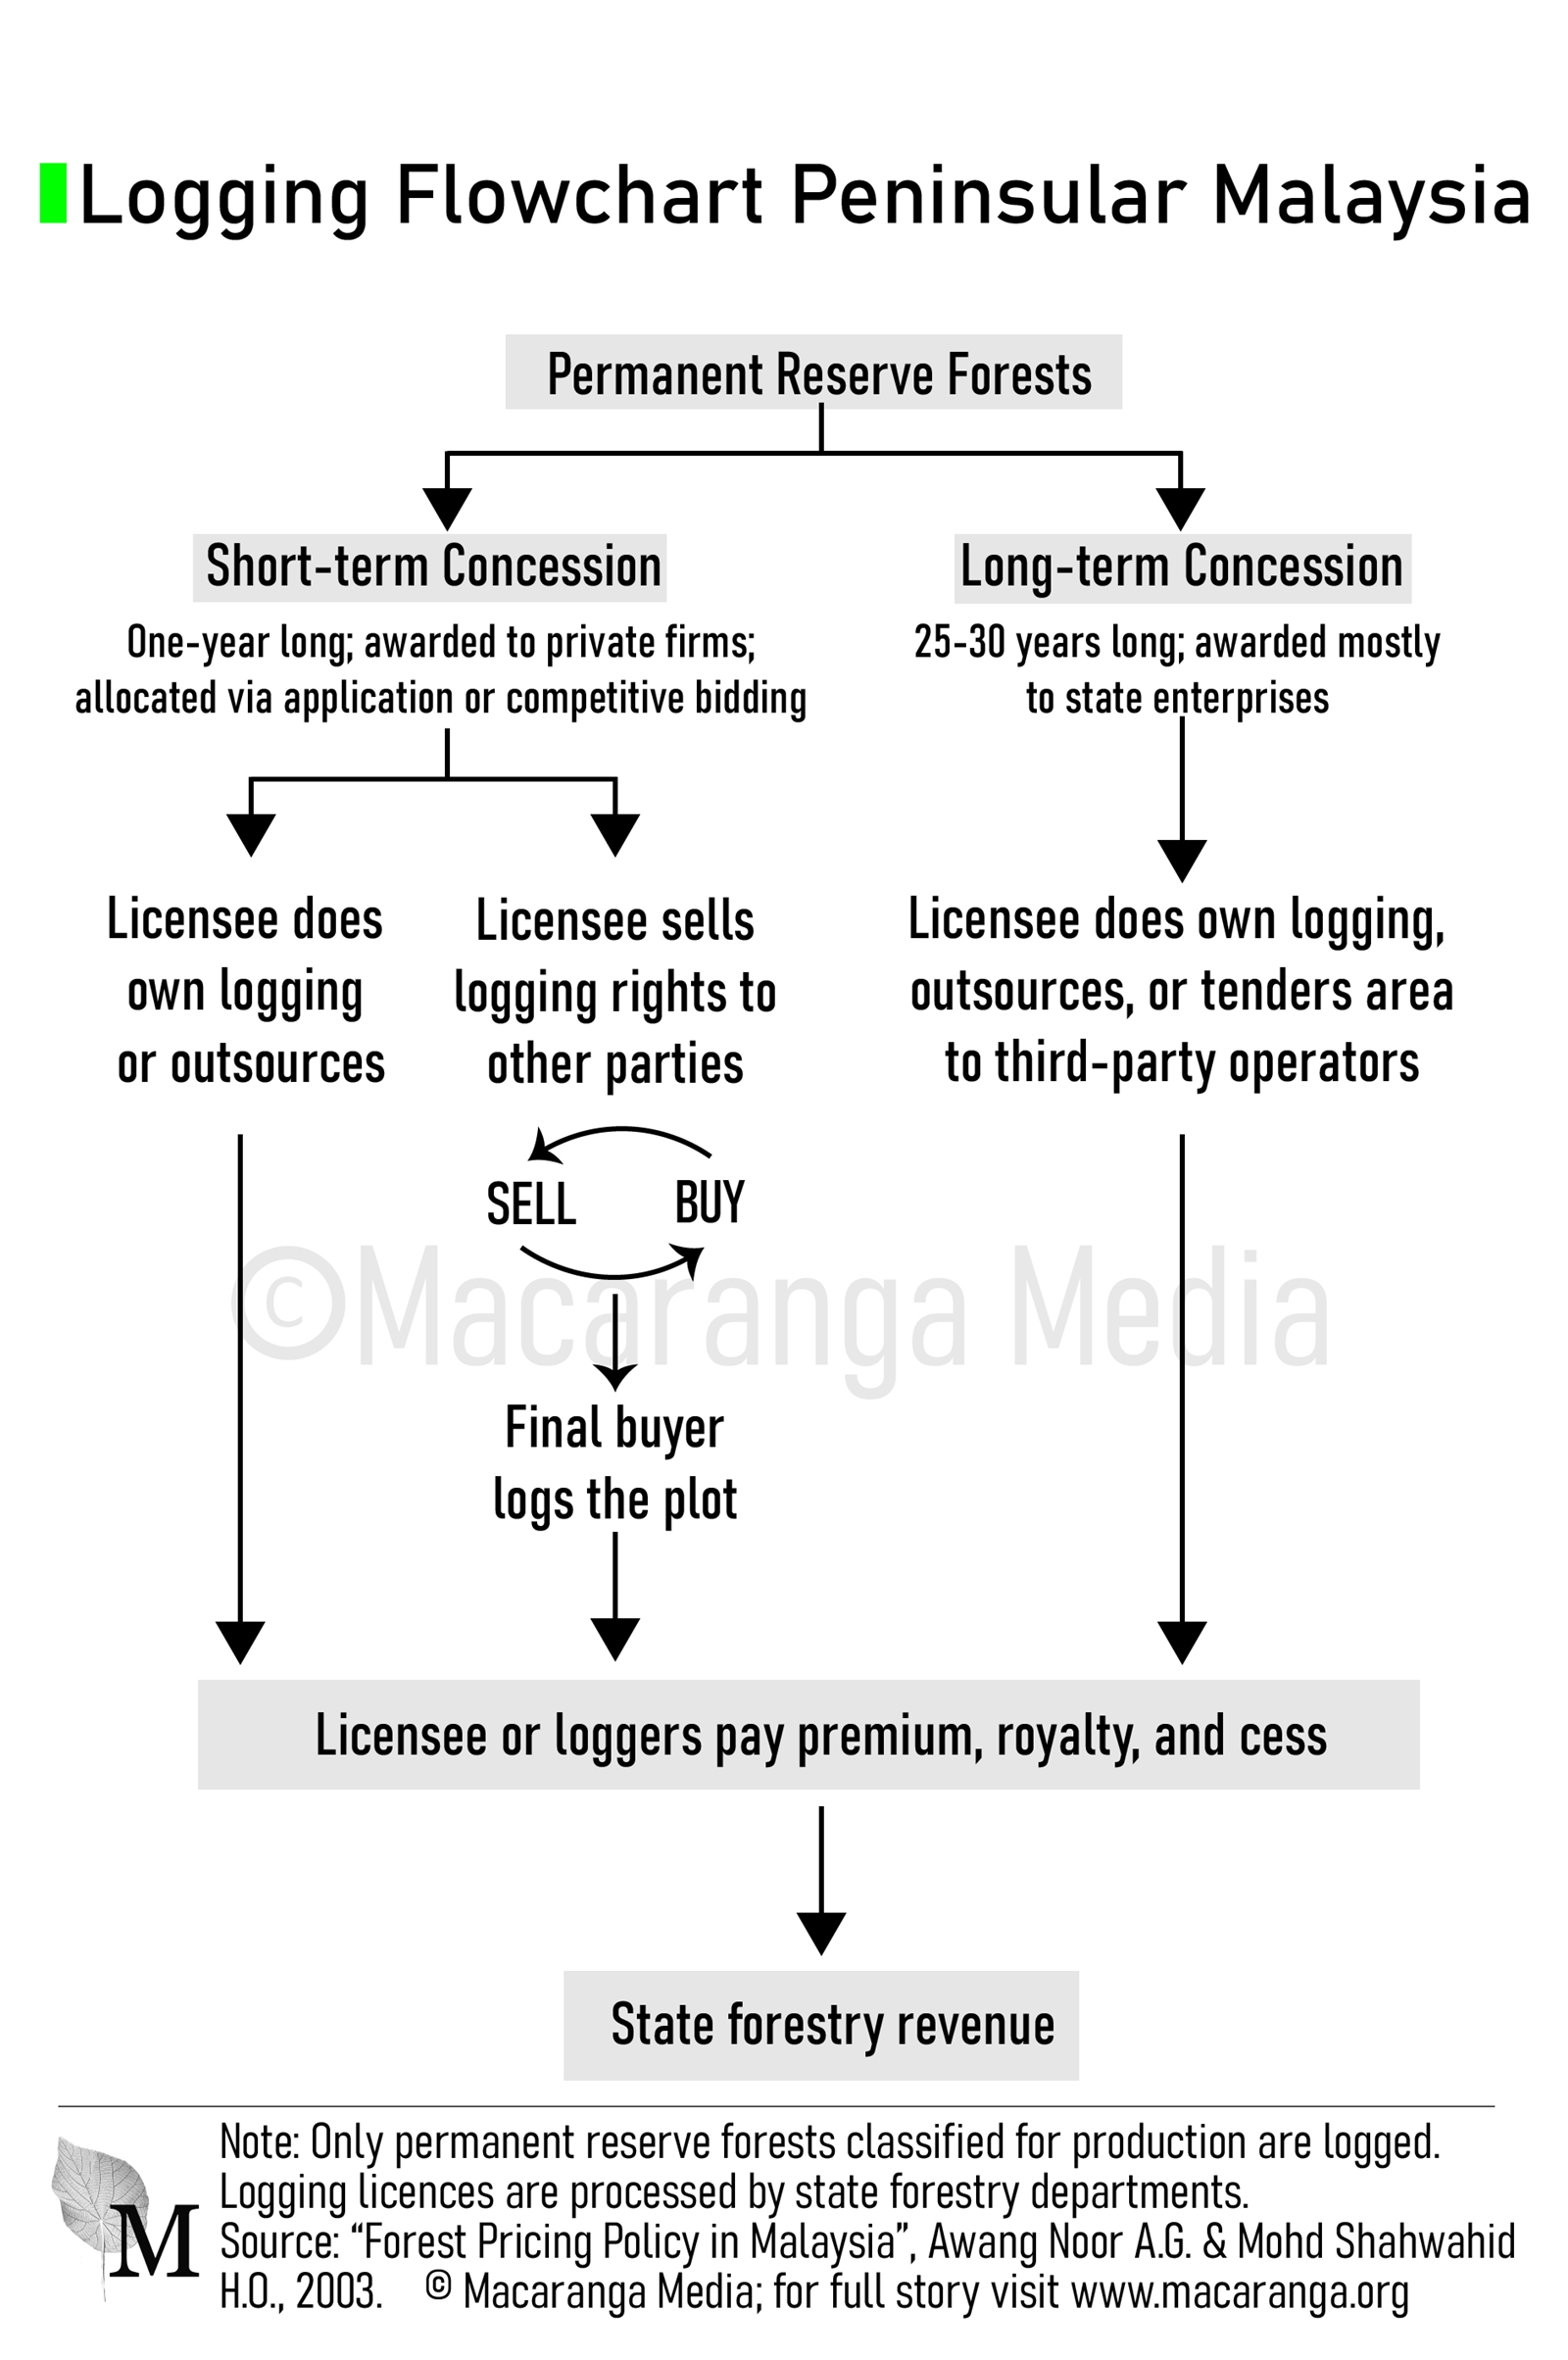 A flowchart showing how logging applications are processed and how states get revenue from logging. (Macaranga)